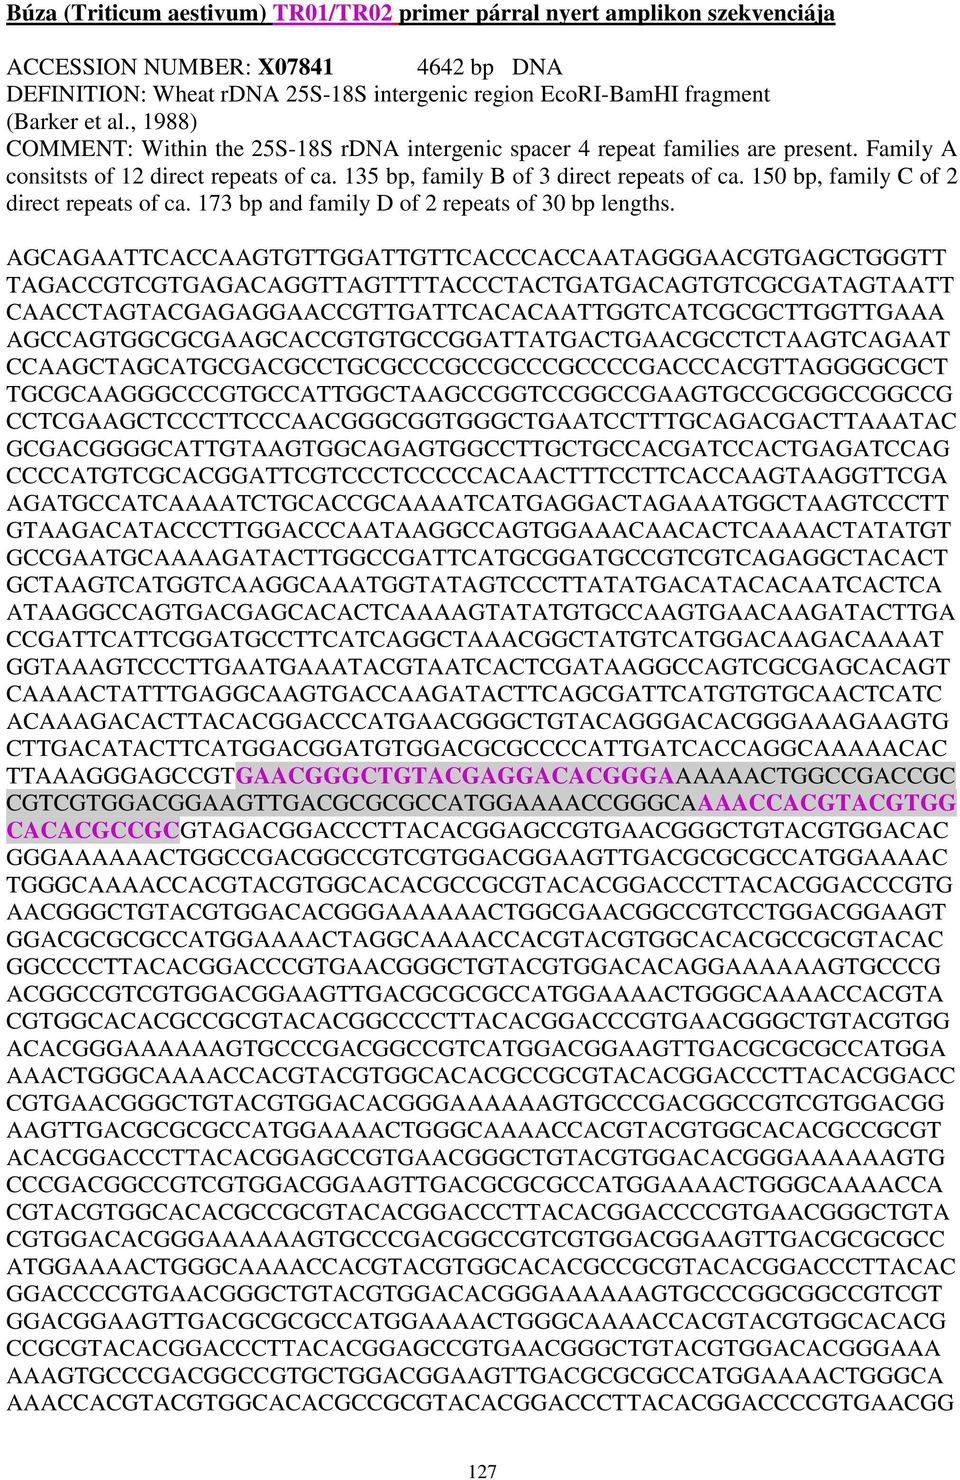 150 bp, family C of 2 direct repeats of ca. 173 bp and family D of 2 repeats of 30 bp lengths.